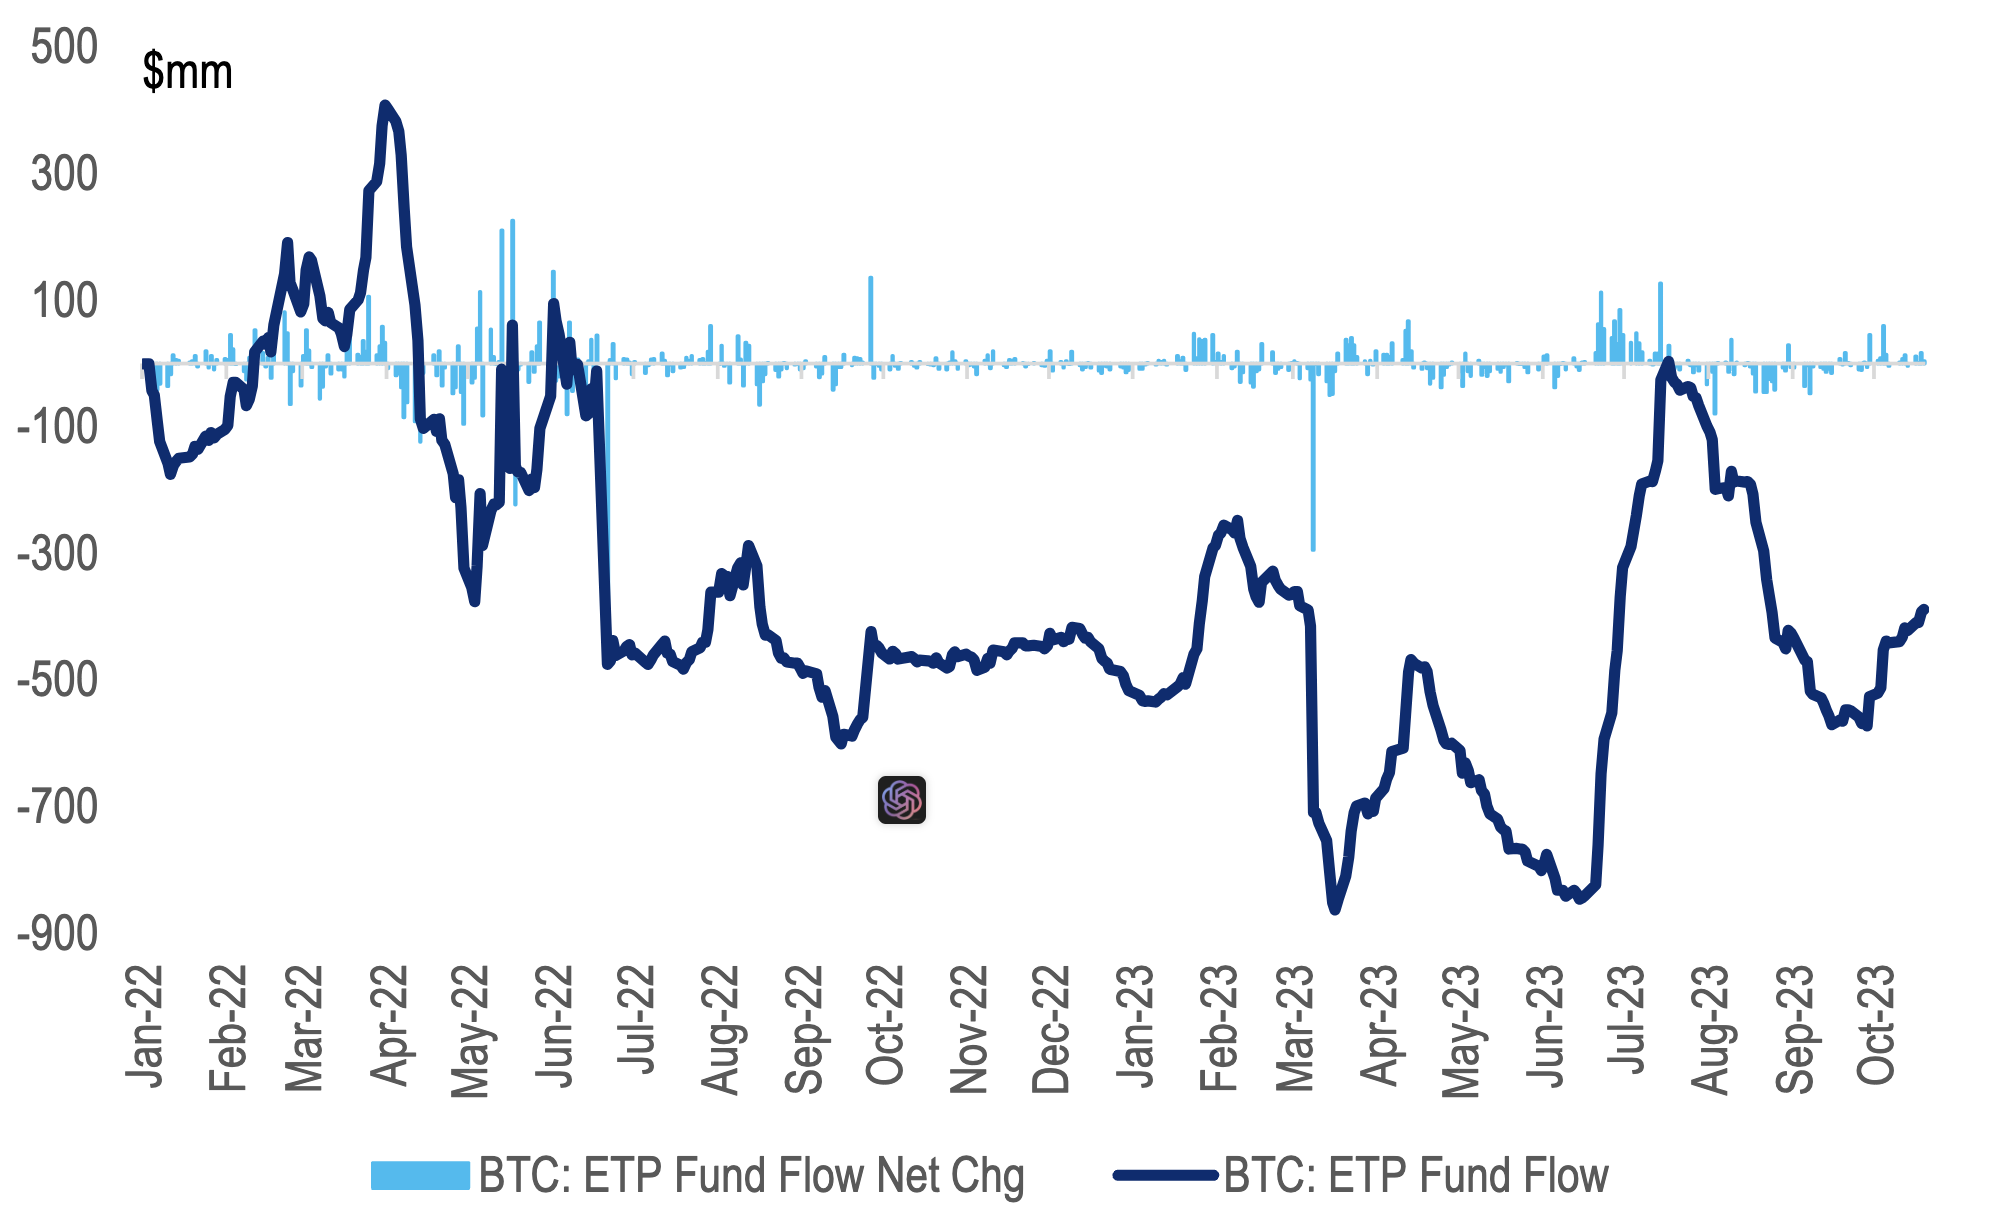 Bitcoin ETP flows picked up in June on increased hopes for spot ETF approval, and inflows have increased once again.